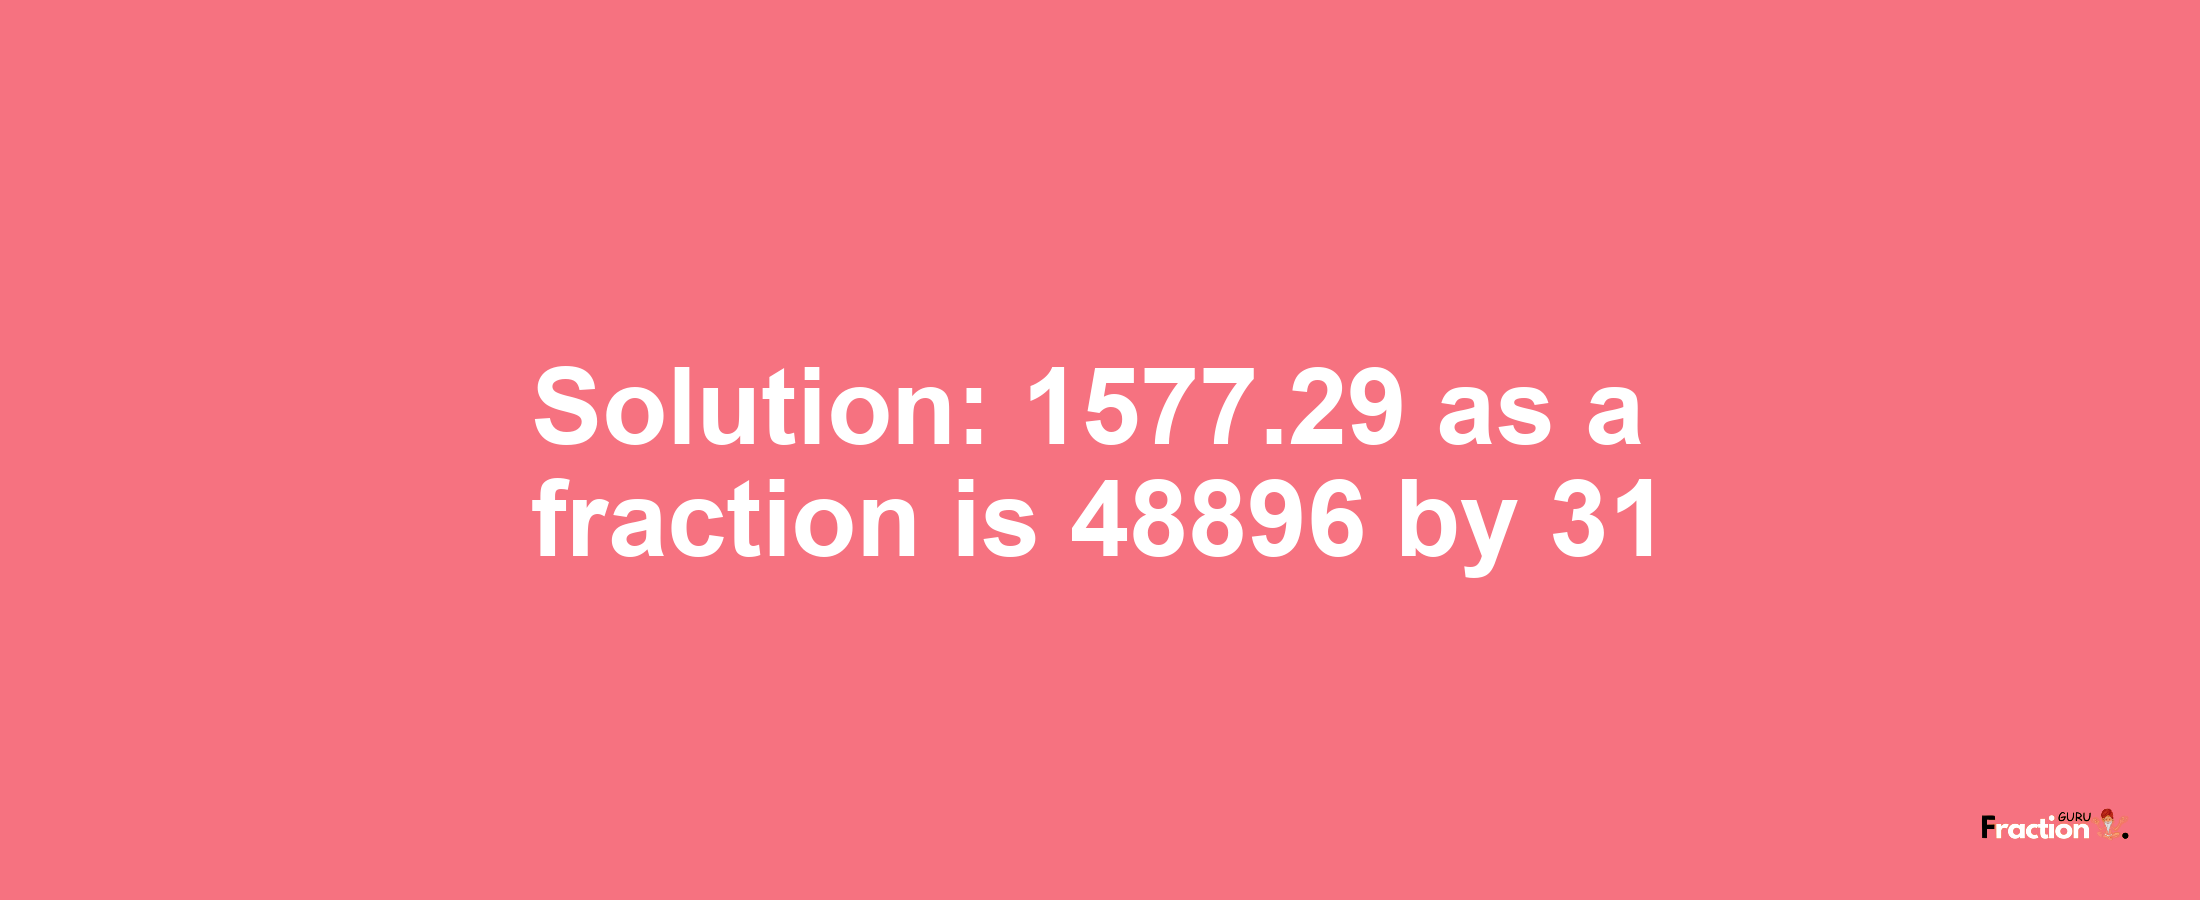 Solution:1577.29 as a fraction is 48896/31